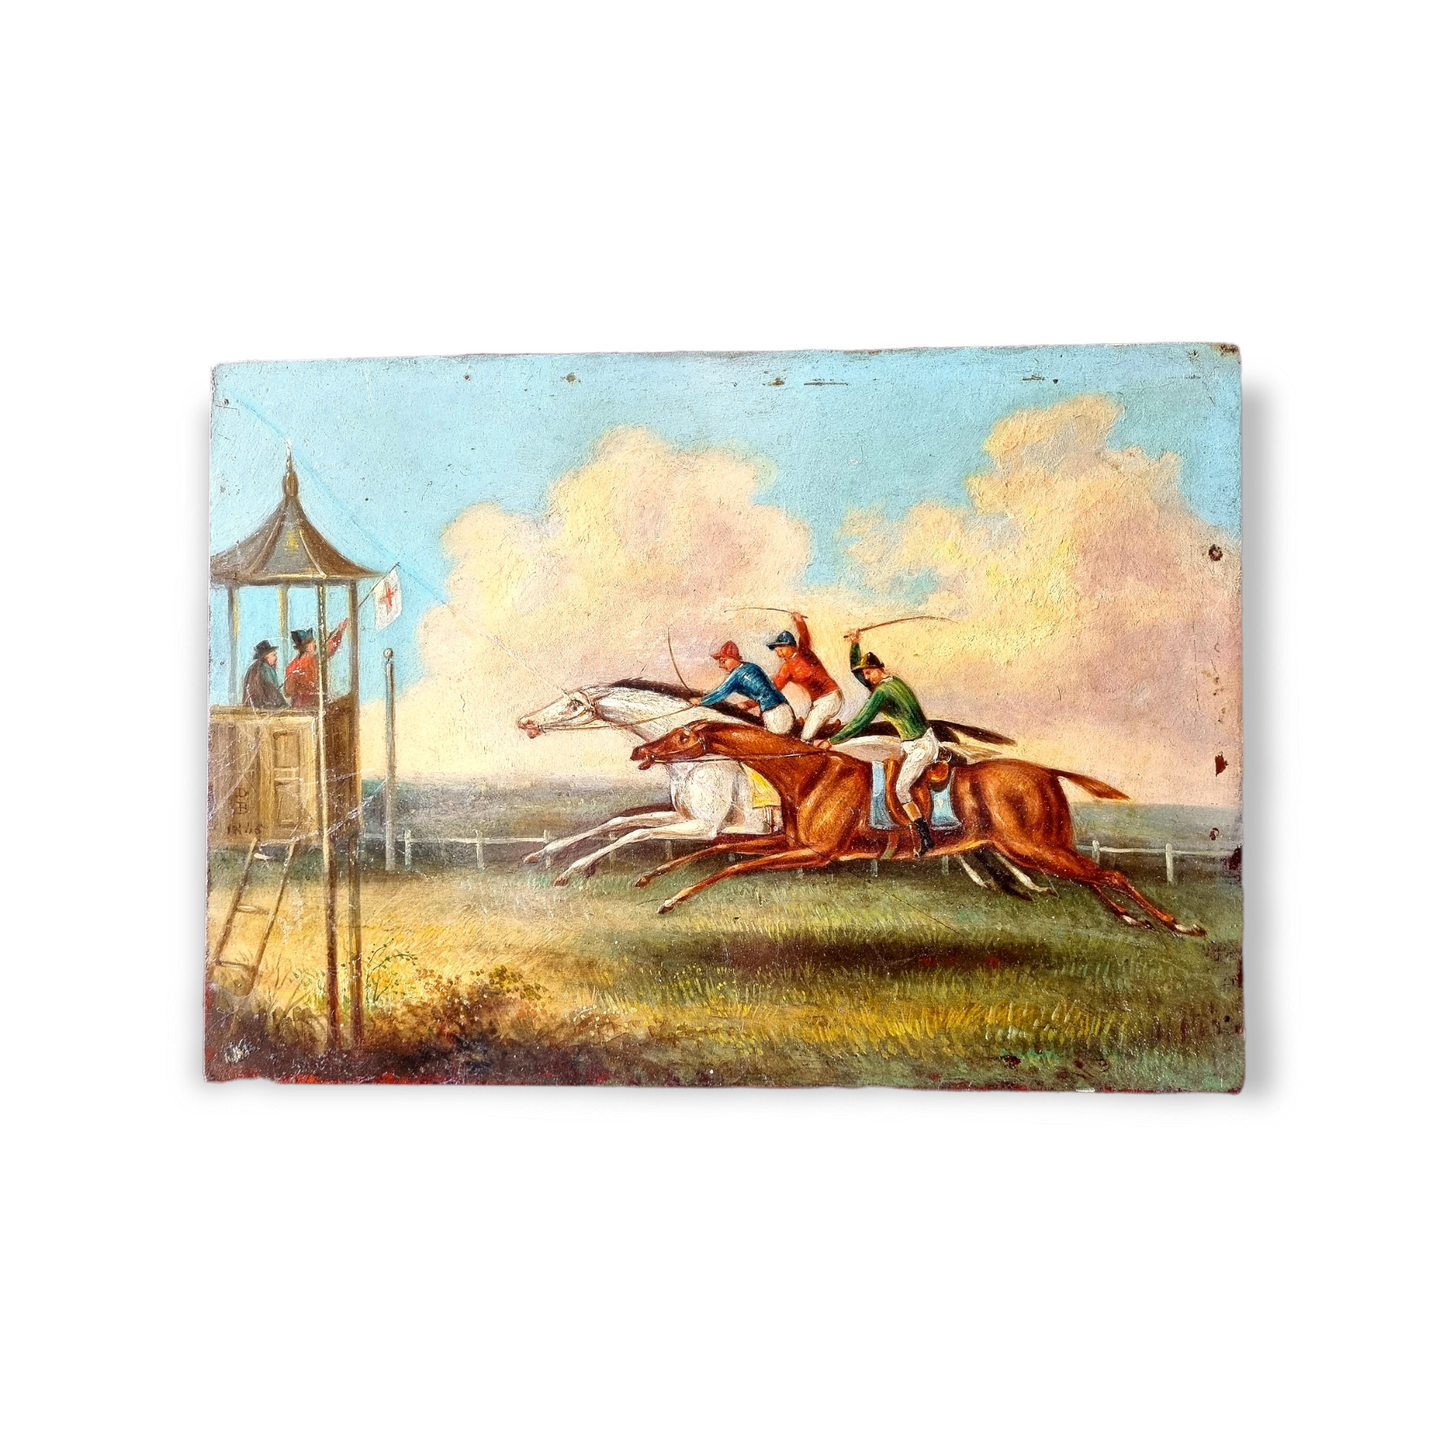 Mid 19th Century Primitive English School Antique Oil on Panel / Painting of a Horse Race, Signed "DB IR" and Dated "1845"